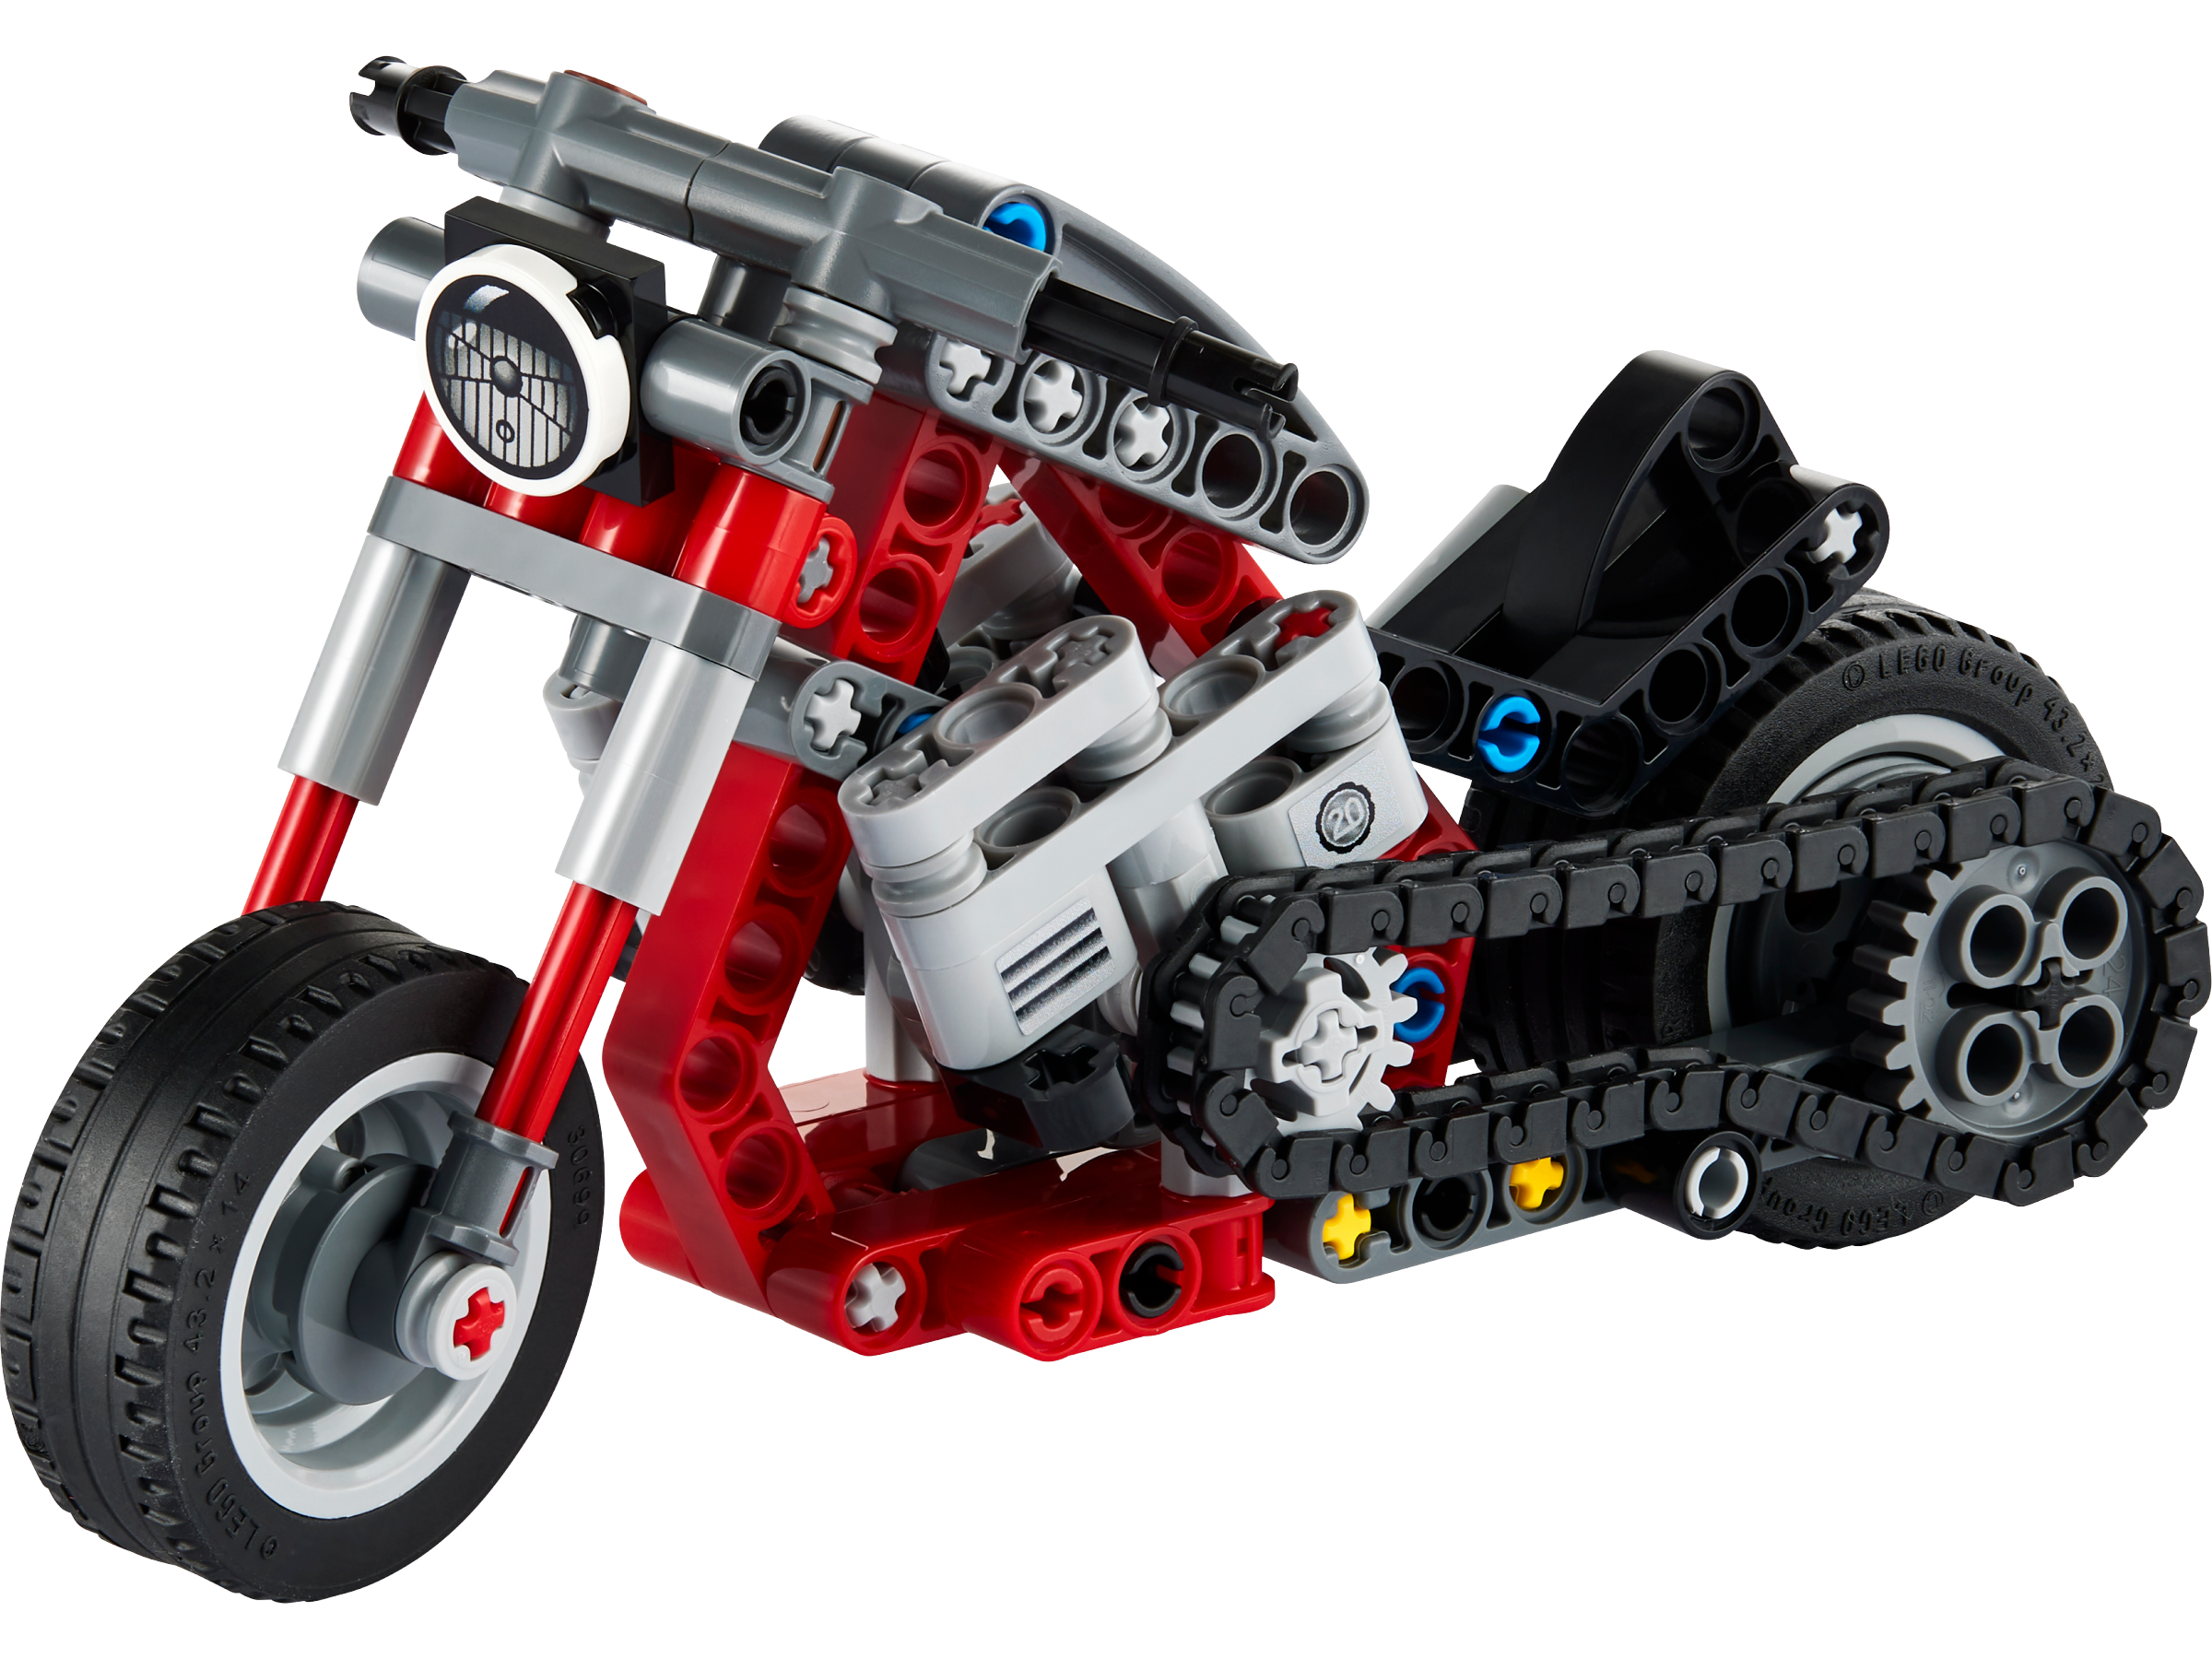 Europa Ombord Souvenir Motorcycle 42132 | Technic™ | Buy online at the Official LEGO® Shop US